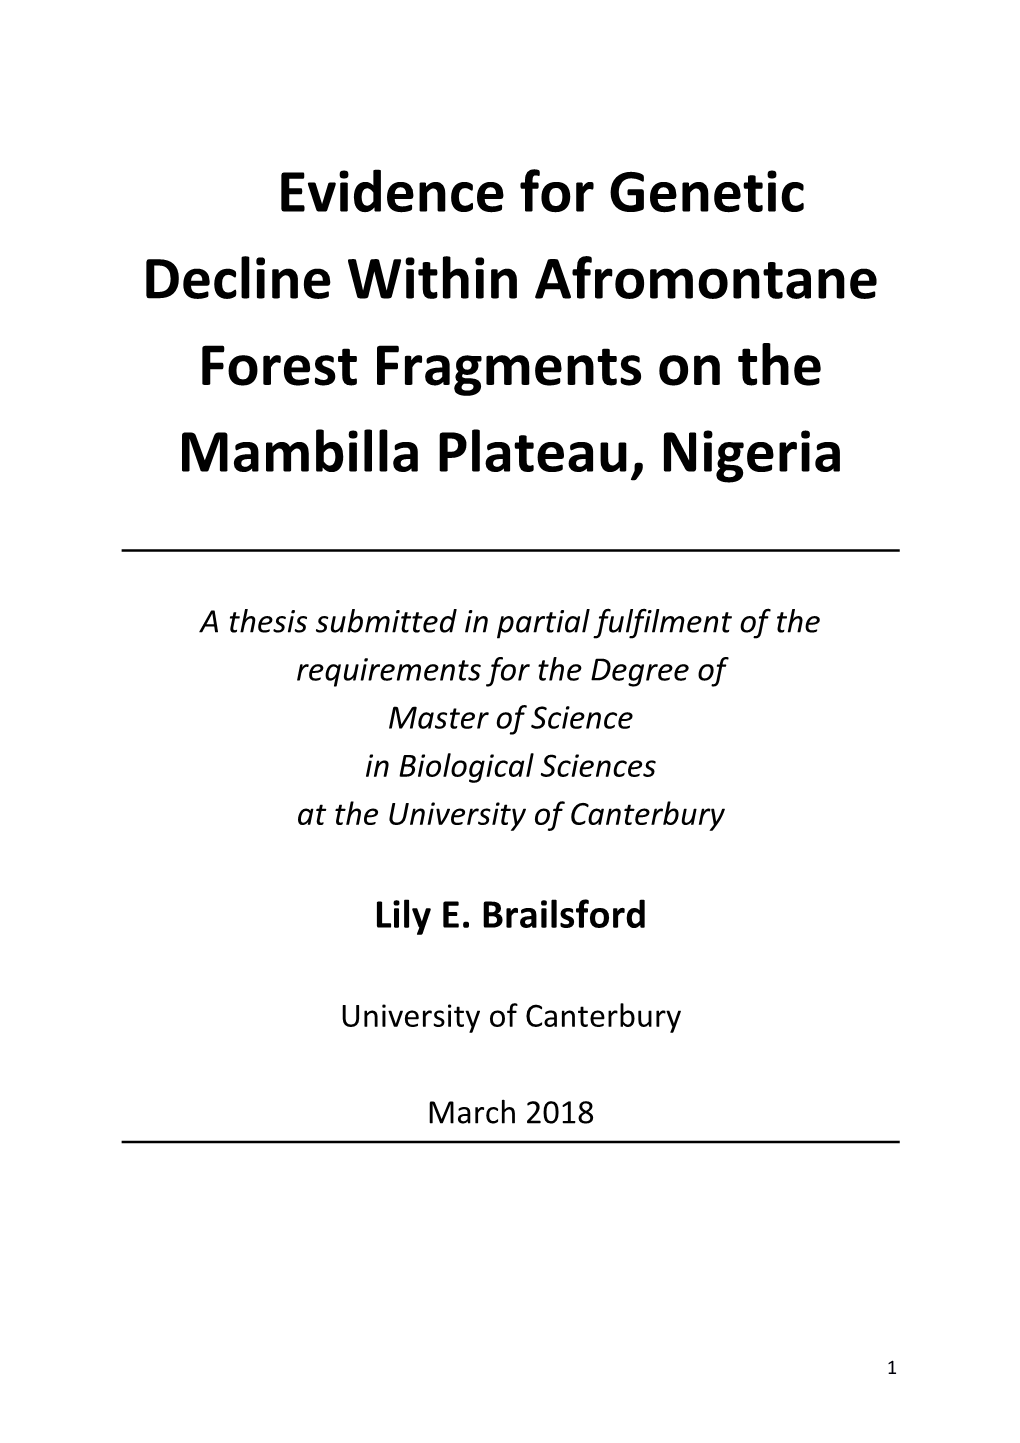 Evidence for Genetic Decline Within Afromontane Forest Fragments on the Mambilla Plateau, Nigeria